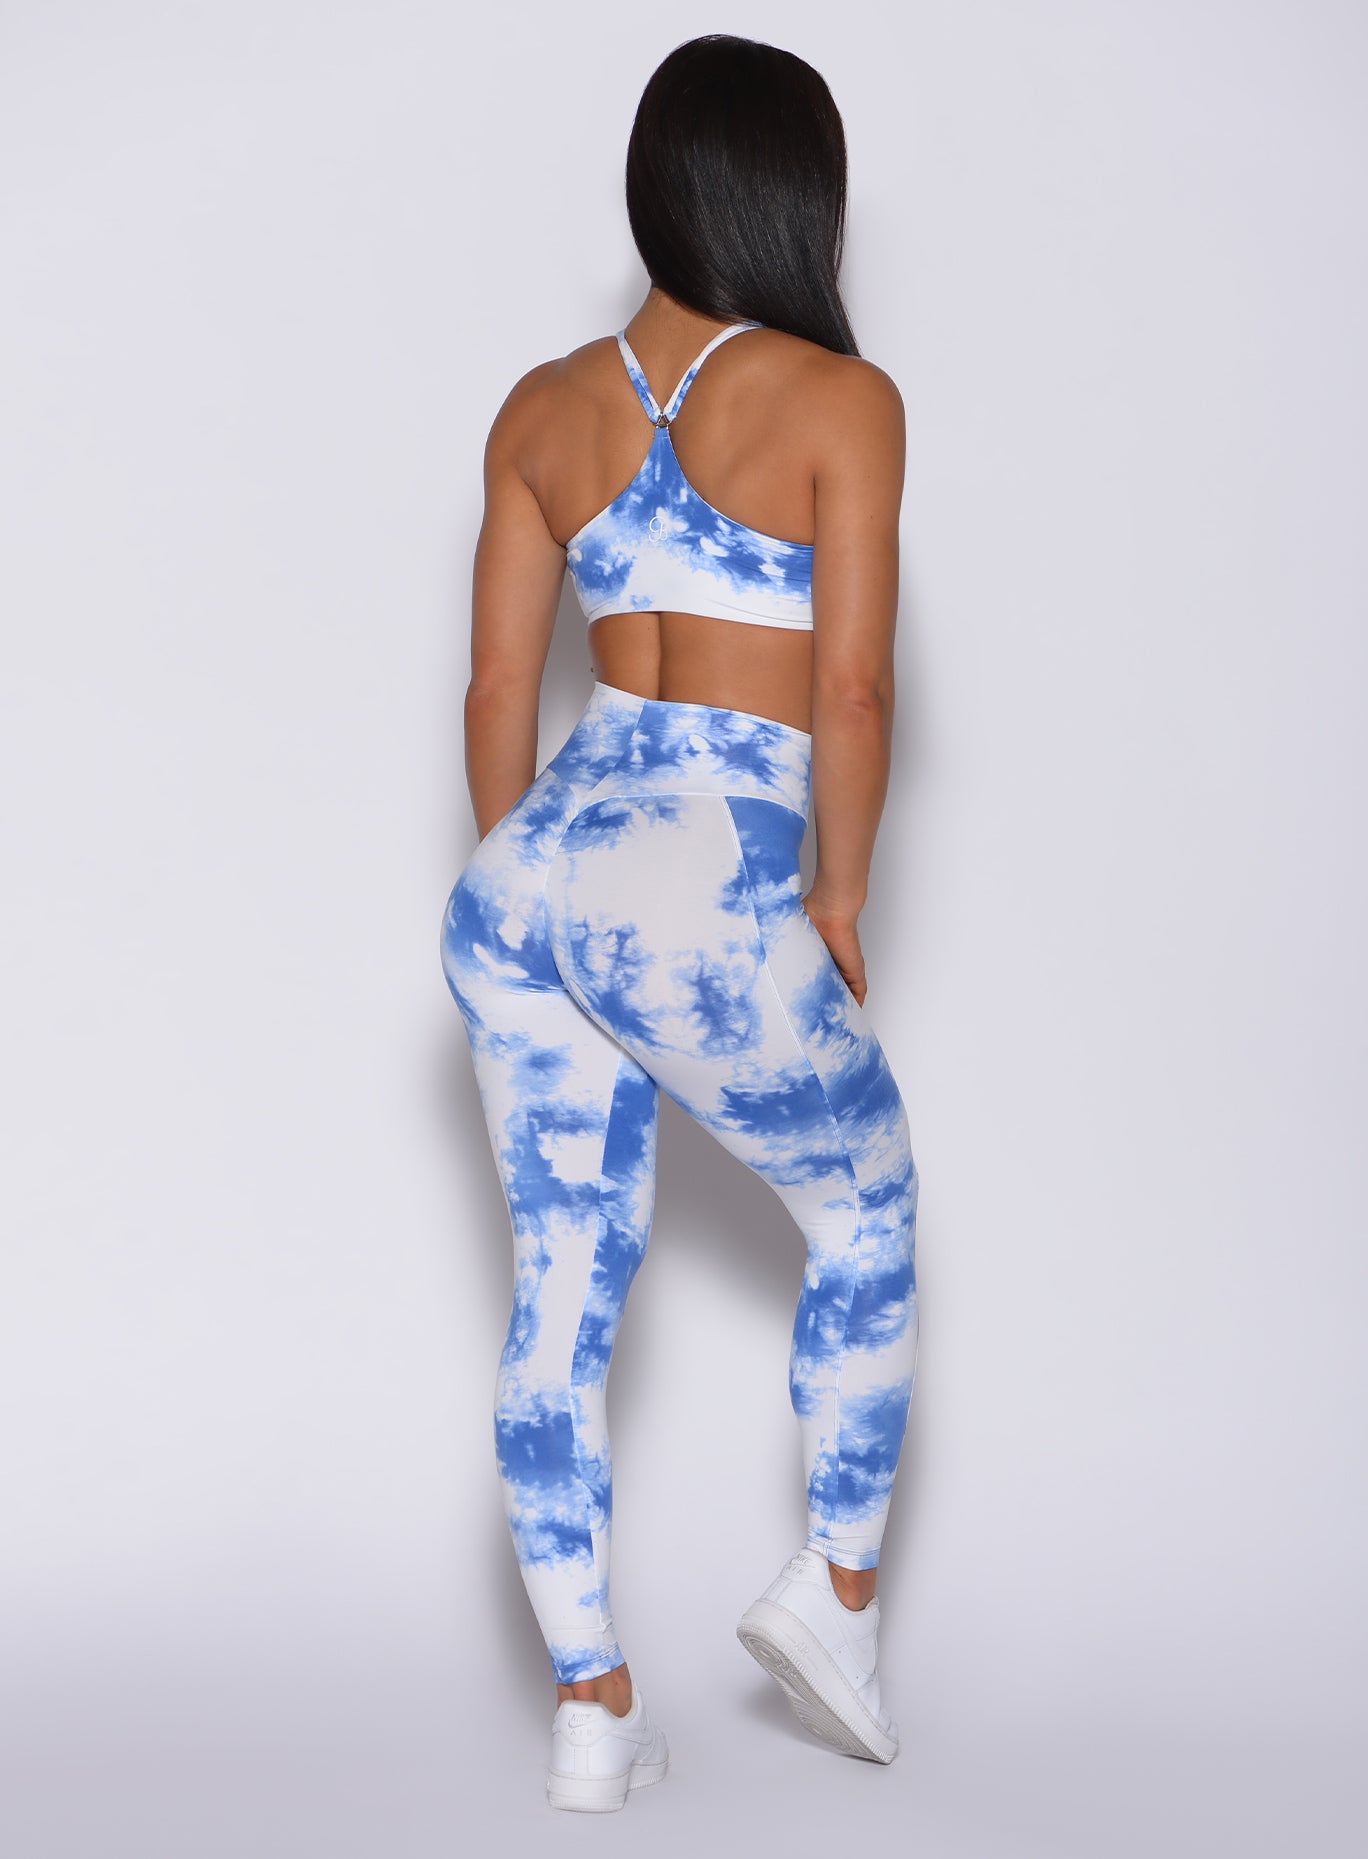 Back profile view of a model wearing our tie dye peach booty leggings in blue white and a matching bra